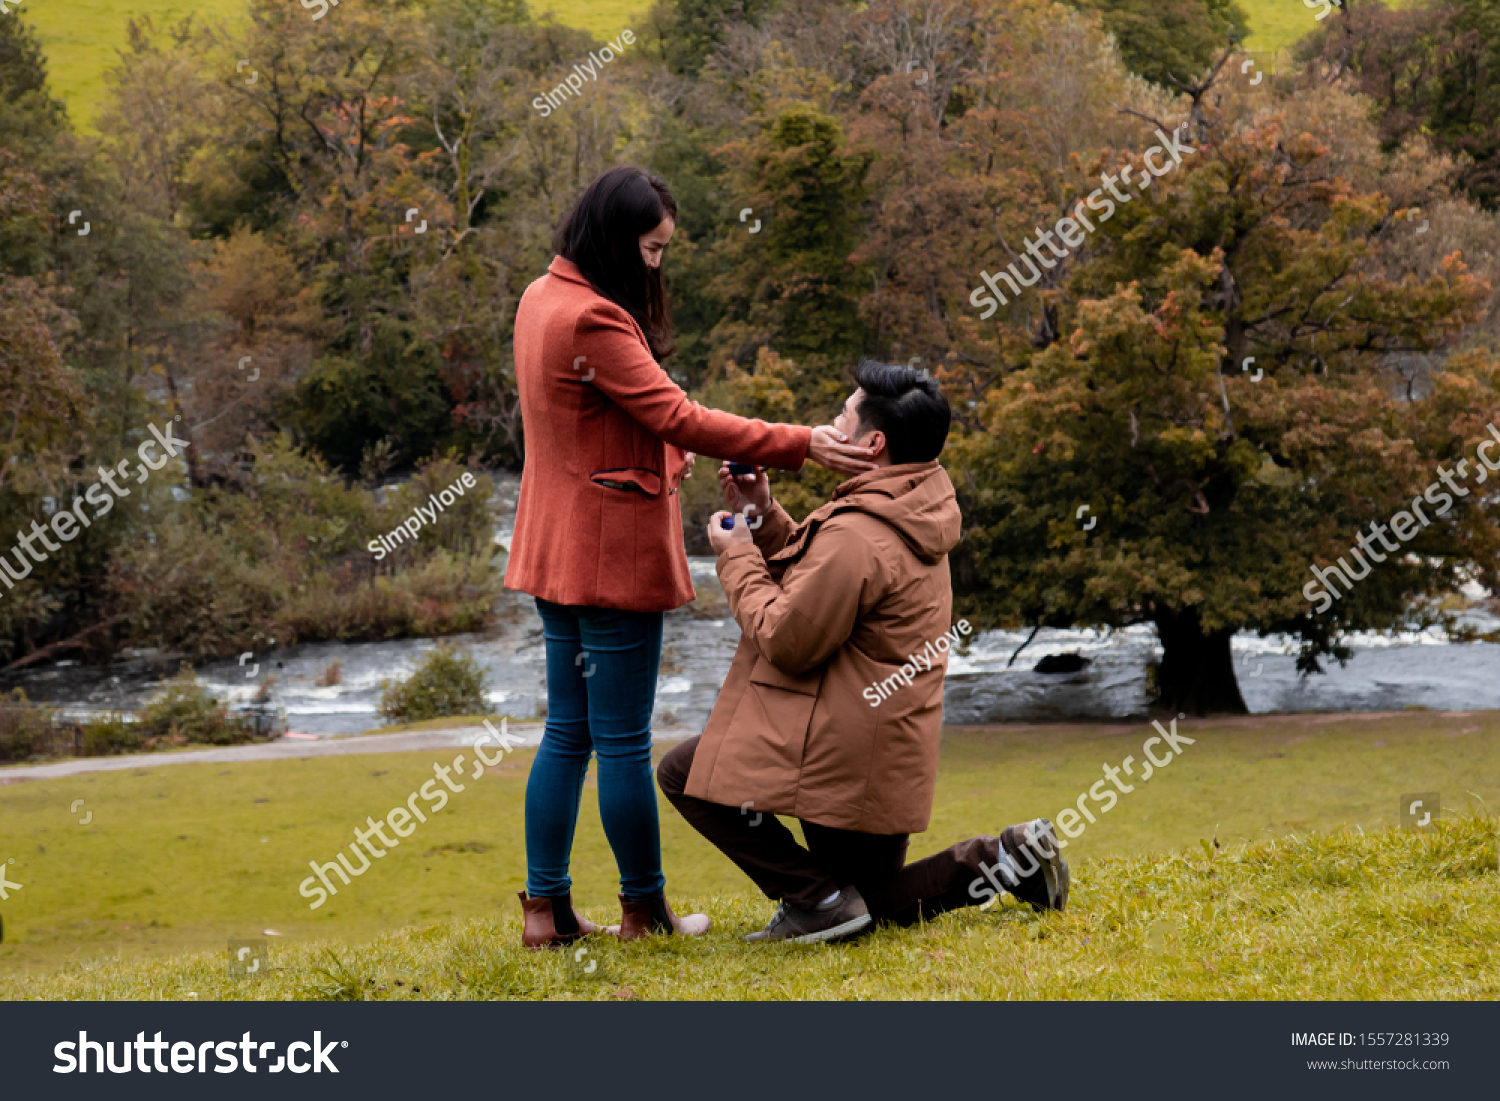 Will you marry me traditional kneeling proposal, happy attractive Asian couple fall in love make proposal to get married engagement with diamond ring in Autumn landscape, beautiful woman crying tears  #1557281339